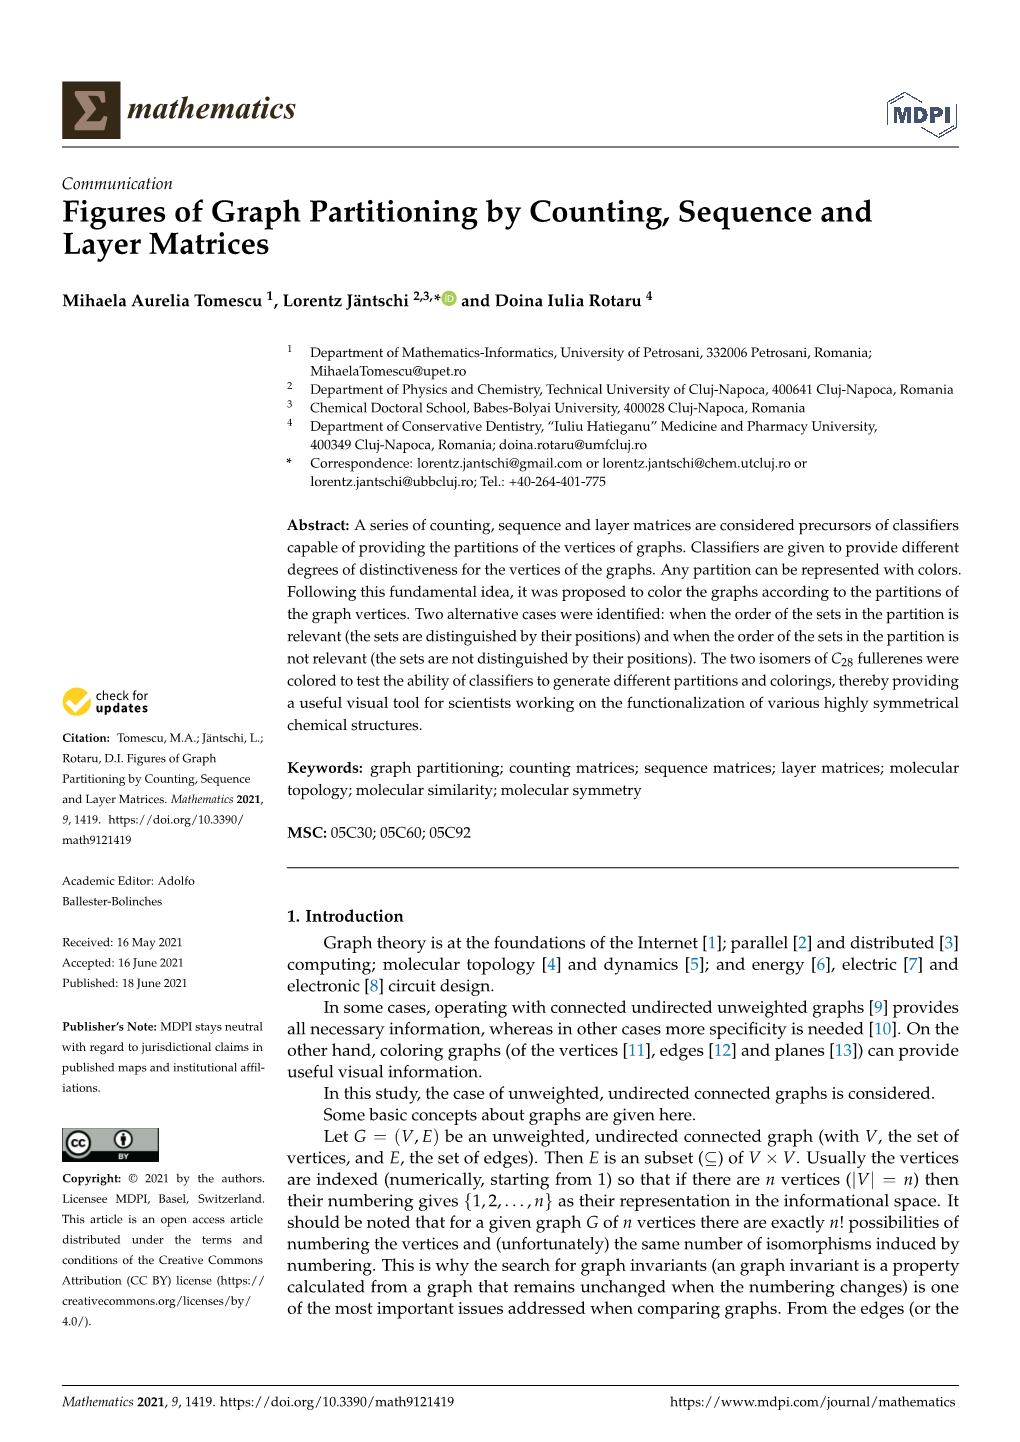 Figures of Graph Partitioning by Counting, Sequence and Layer Matrices